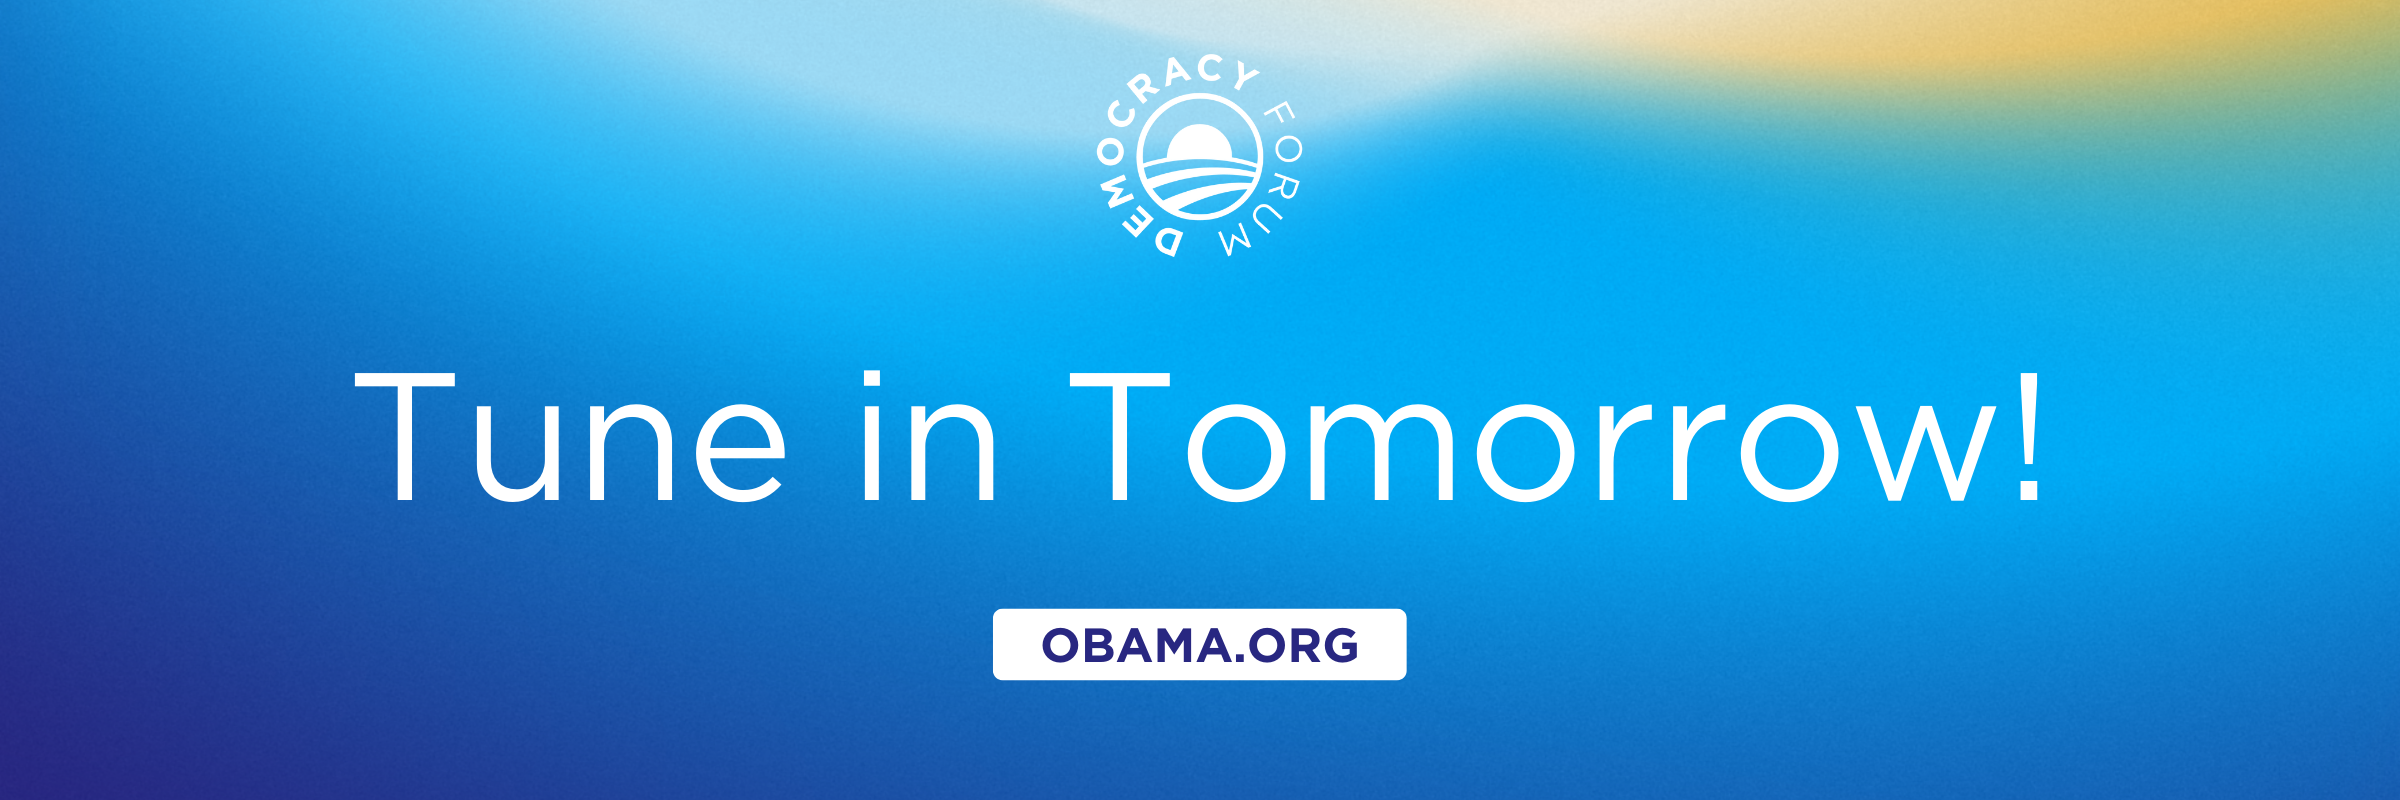 Centered text reads, “Democracy Forum'' and “Tune in tomorrow.” At the bottom of the image, a white rectangular button reads, “Obama.org.” The background is an abstract gradient of blue, yellow, and green. 